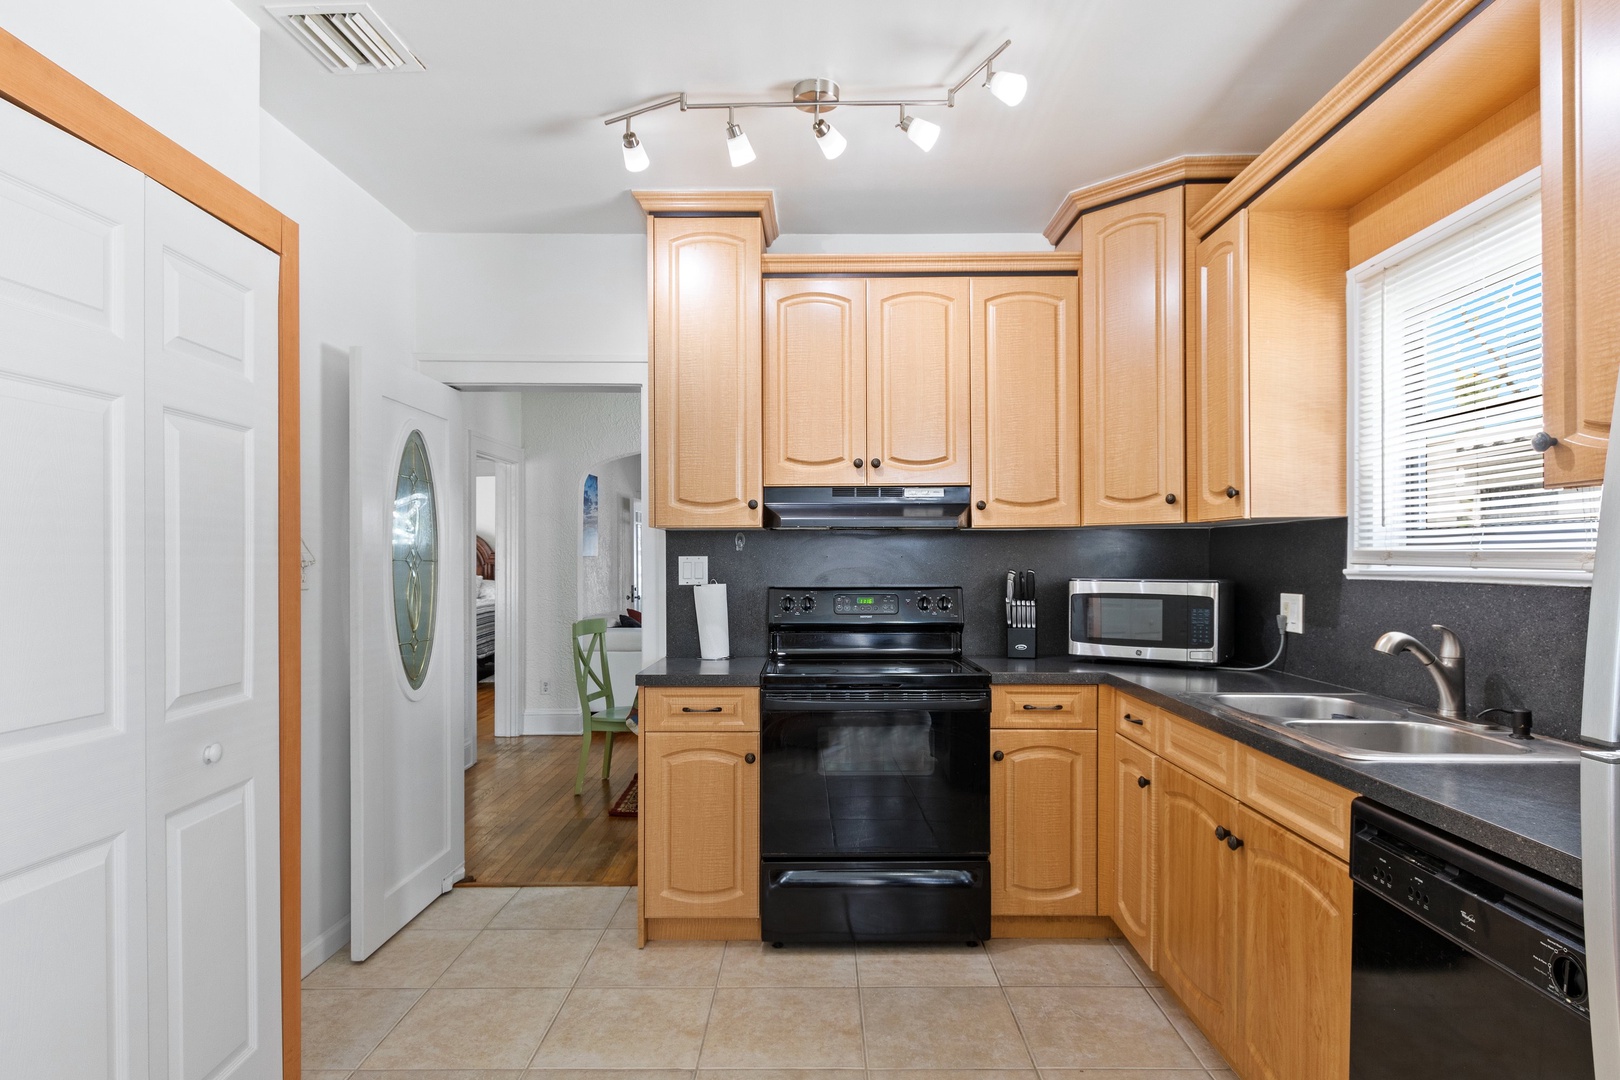 The warm, inviting kitchen offers ample space & all the comforts of home